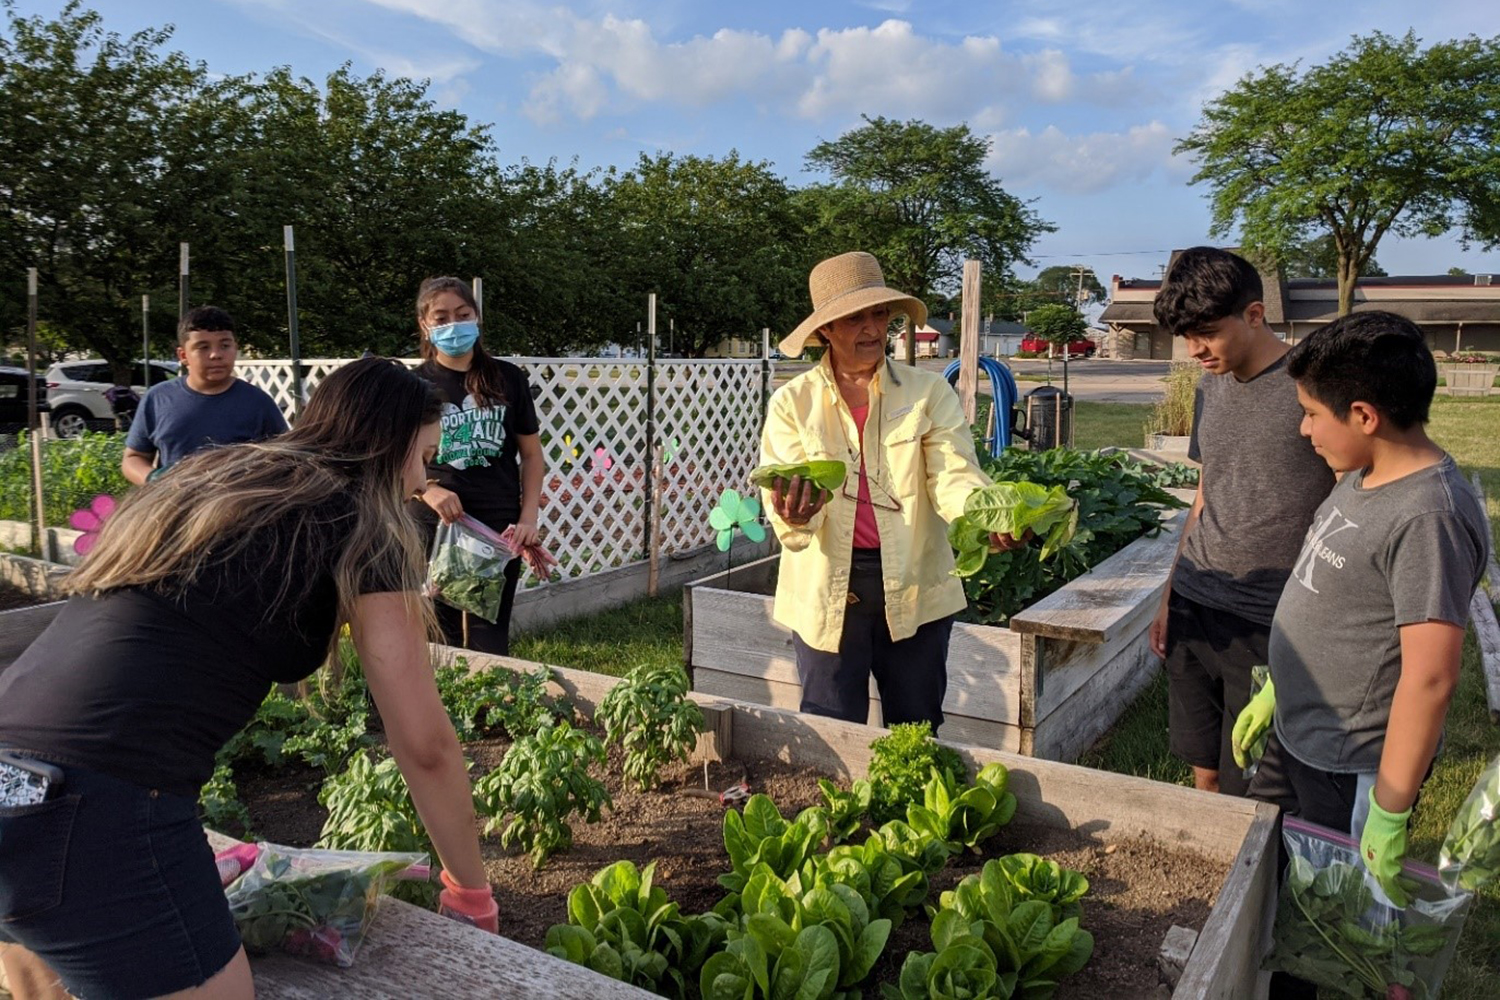 group of children gather around a raised bed garden listening to an older woman holding vegetables